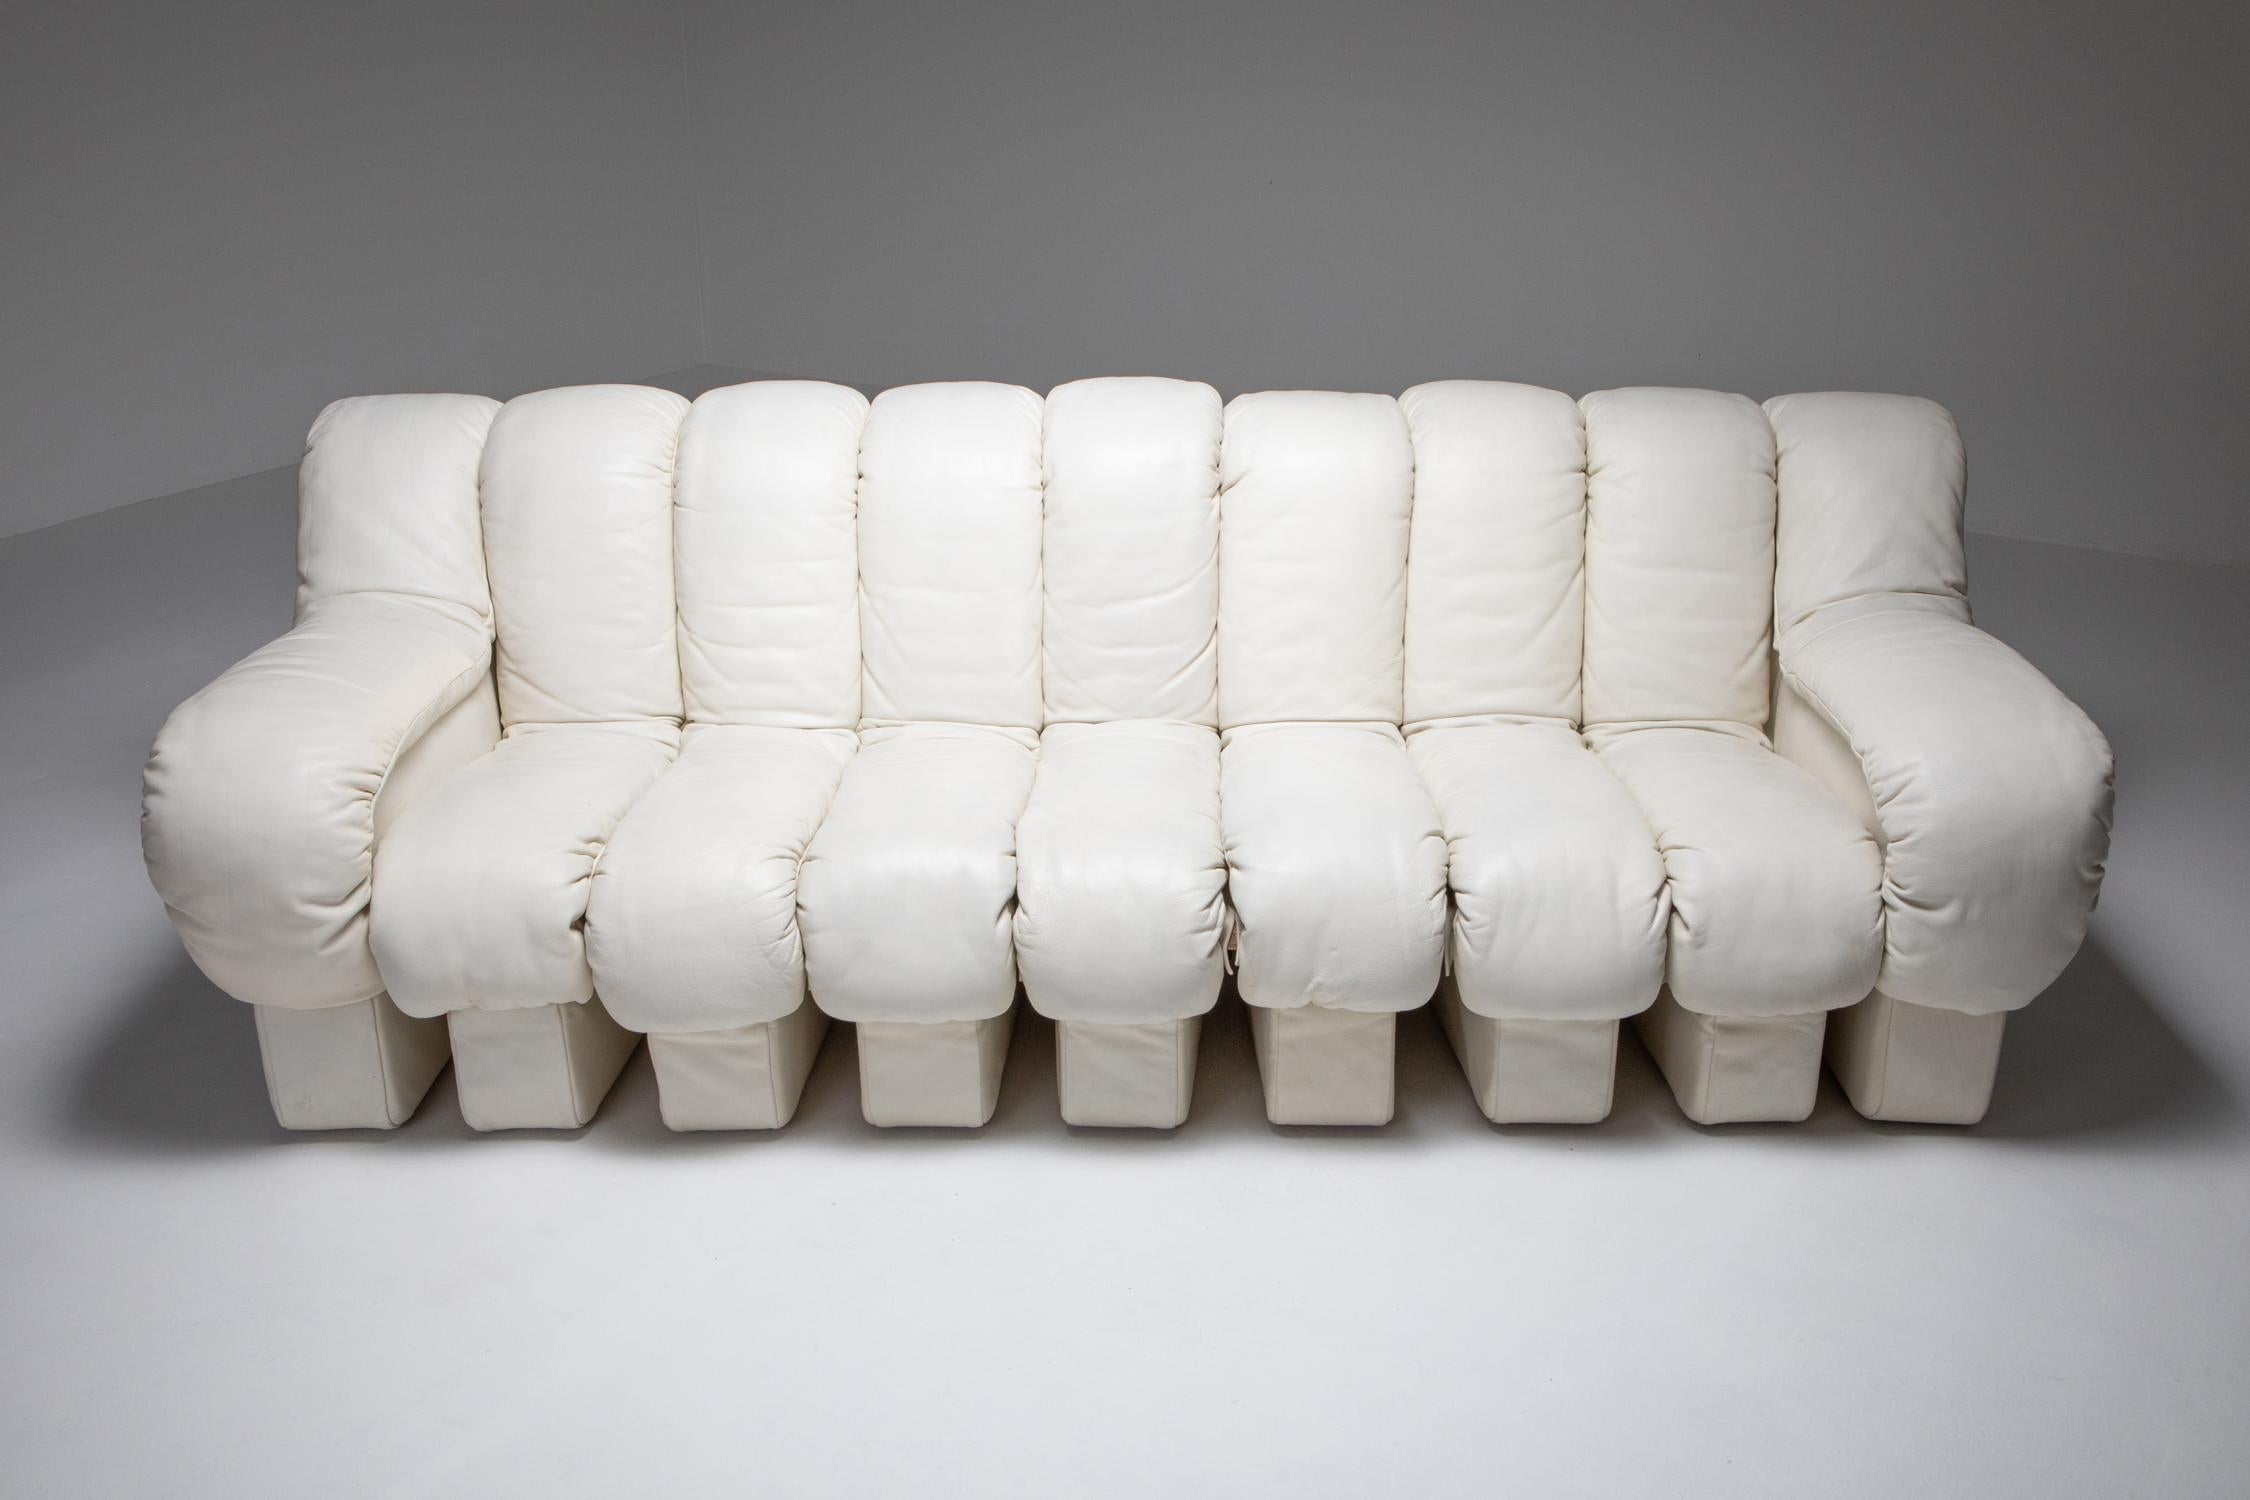 Sectional sofa by De Sede, Switzerland, 1970s

White leather three-seat couch 

Launched in 1972, DS-600 is an indestructible, variable modular system of upholstered furniture consisting of individual, addable armchair elements. These consist of